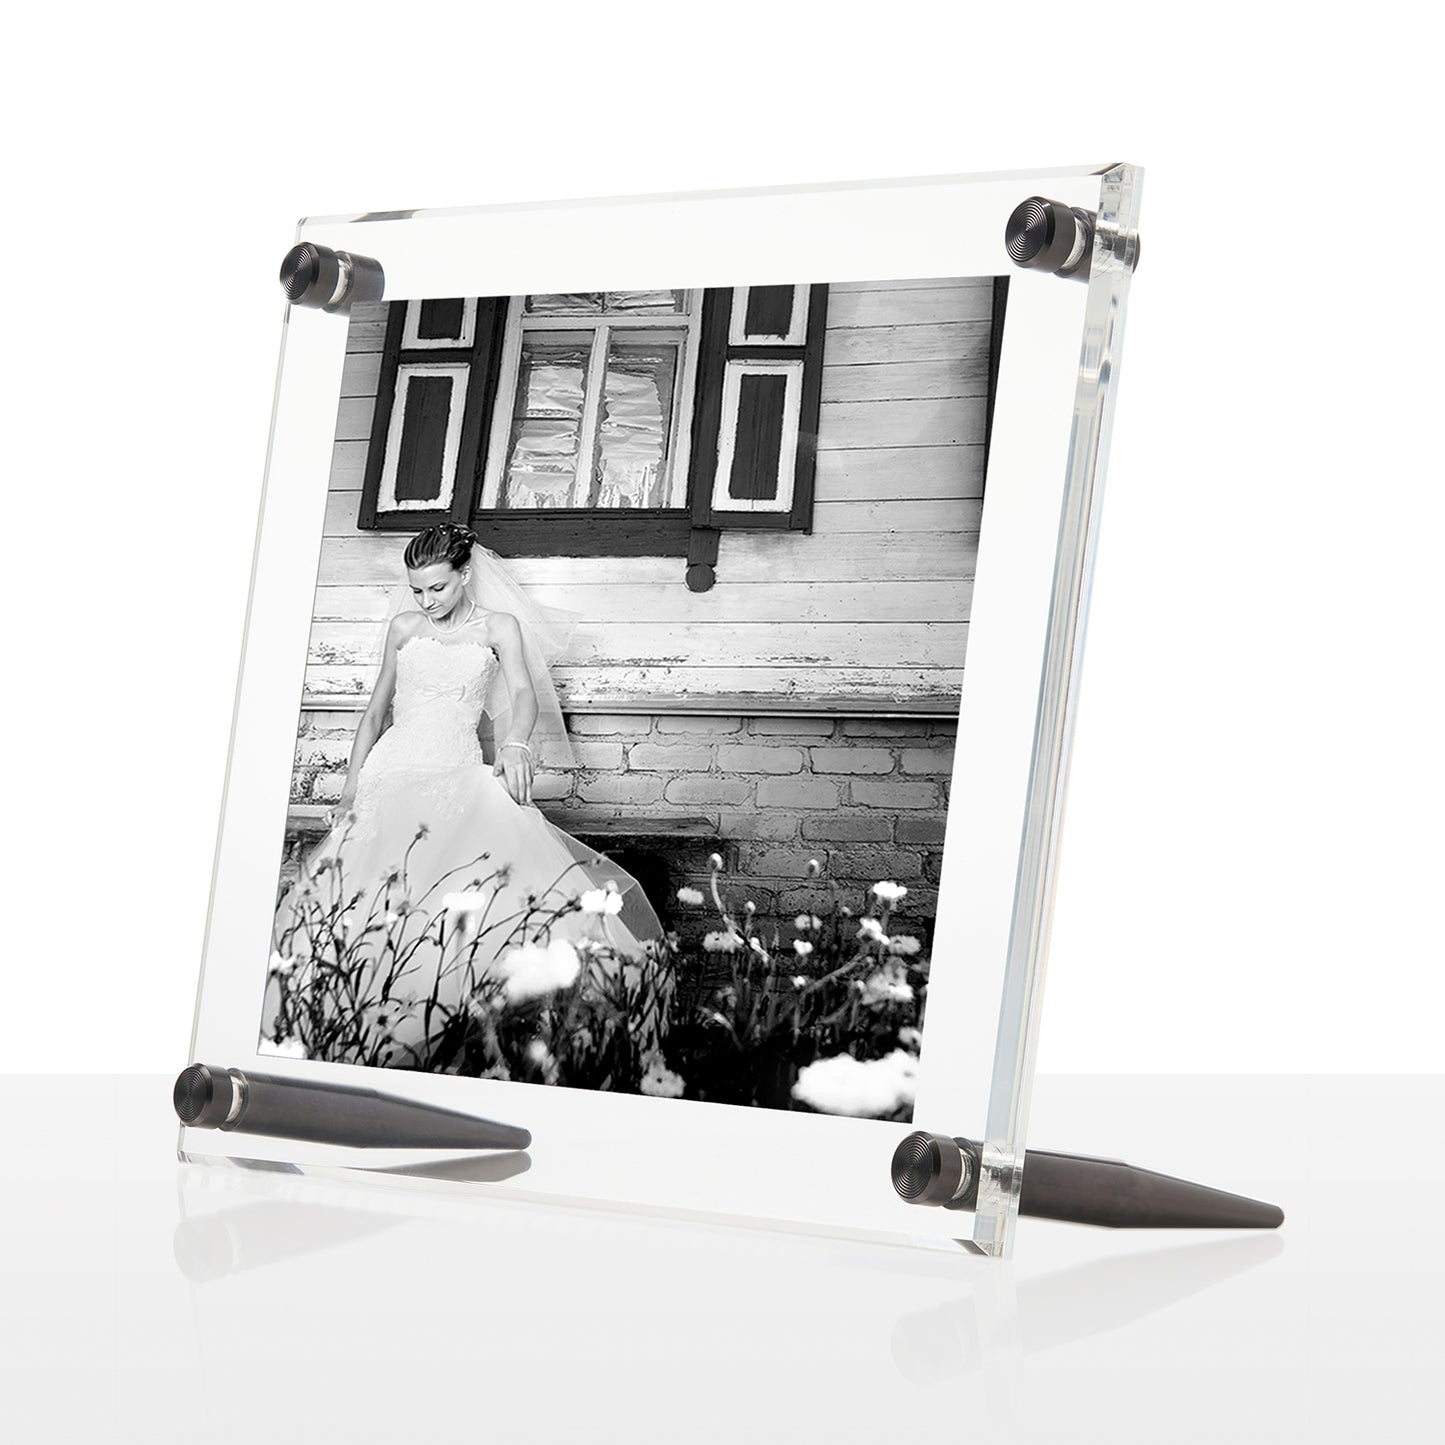 Case of 5 TableTop for 5x7" Photos